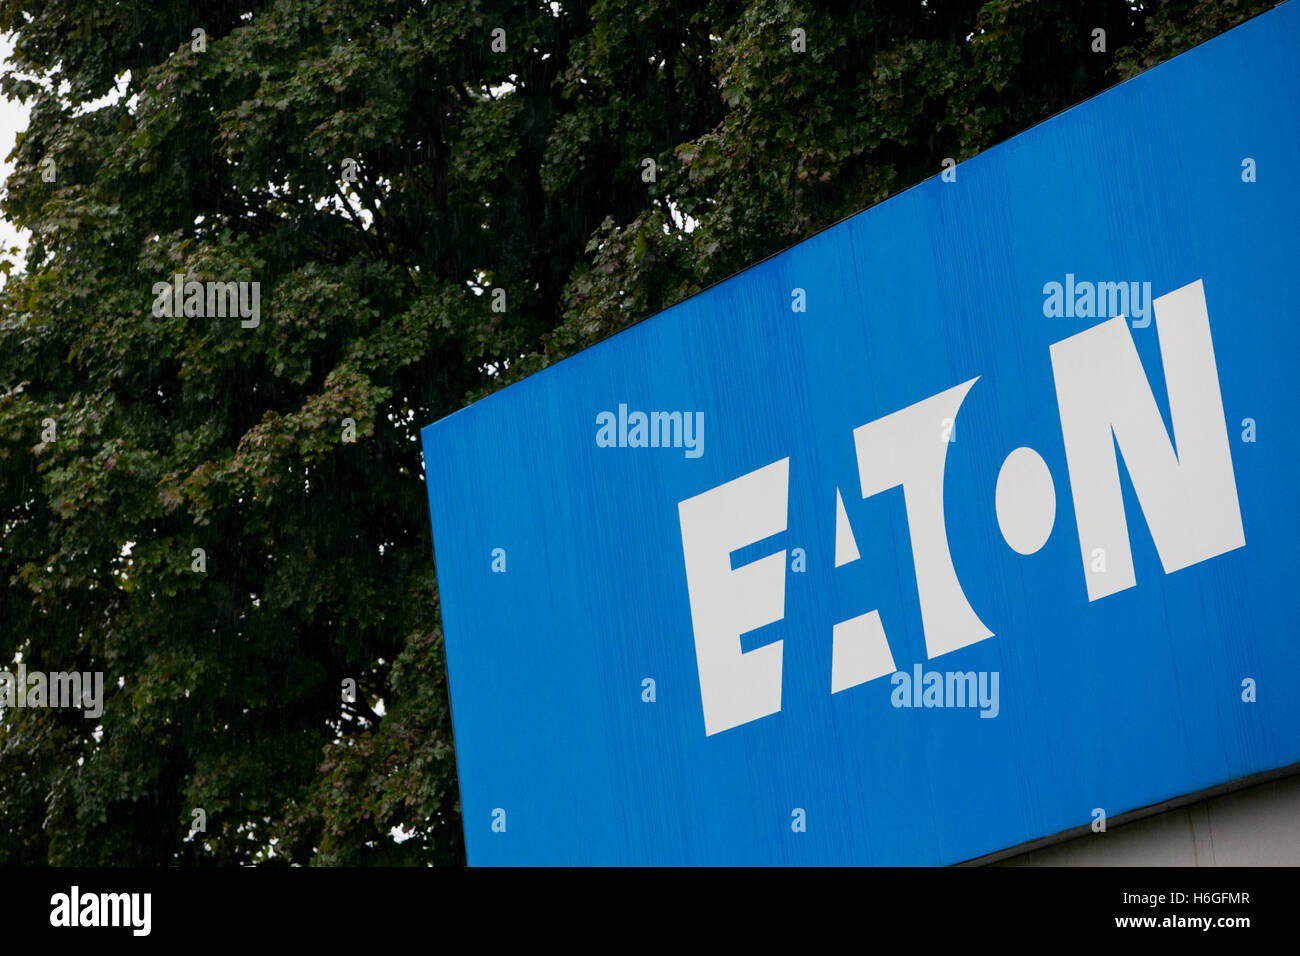 A logo sign outside of a facility occupied by the Eaton Corporation in Galesburg, Michigan on October 16, 2016. Stock Photo